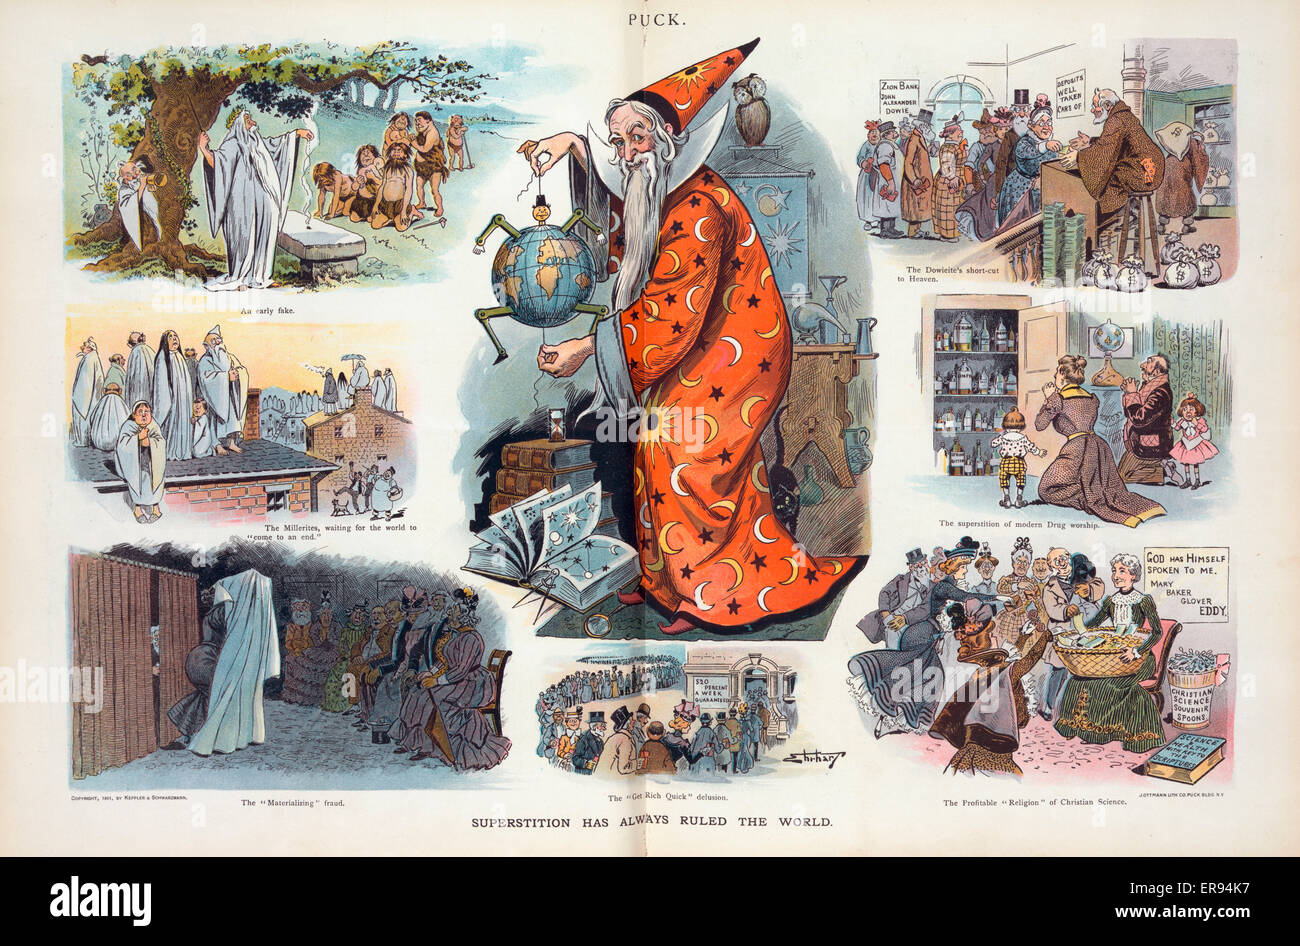 Superstition has always ruled the world. Illustration shows a central figure of a wizard holding the strings to a wooden jumping toy shaped like a globe with a head, arms and legs; he is surrounded by vignettes with captions: An early fake, The Millerites Stock Photo